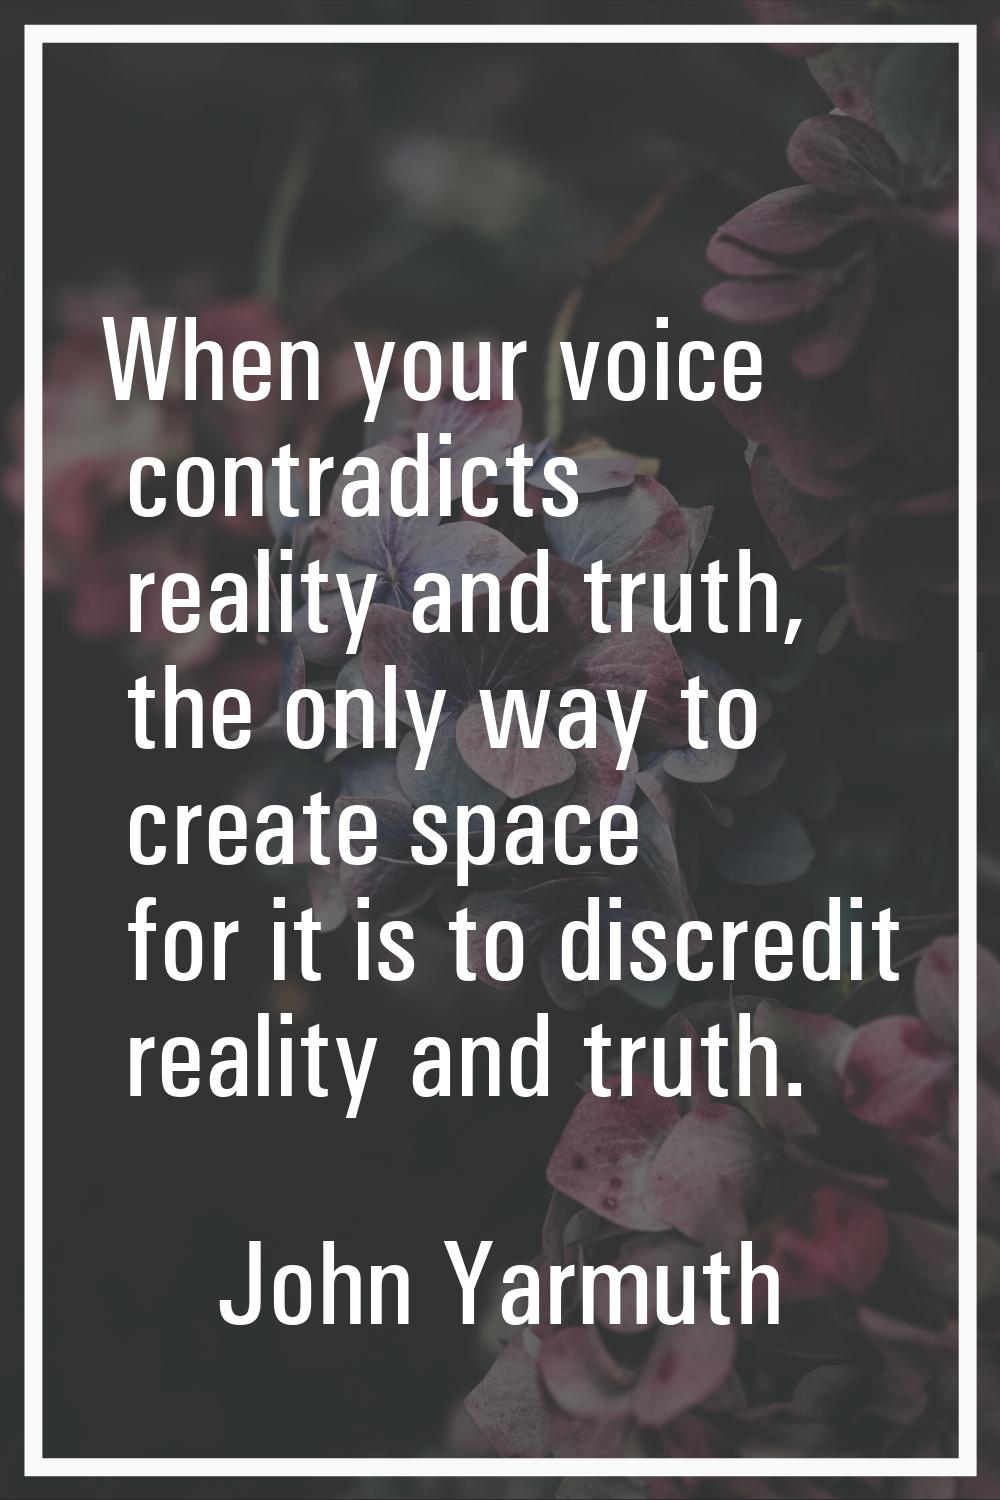 When your voice contradicts reality and truth, the only way to create space for it is to discredit 